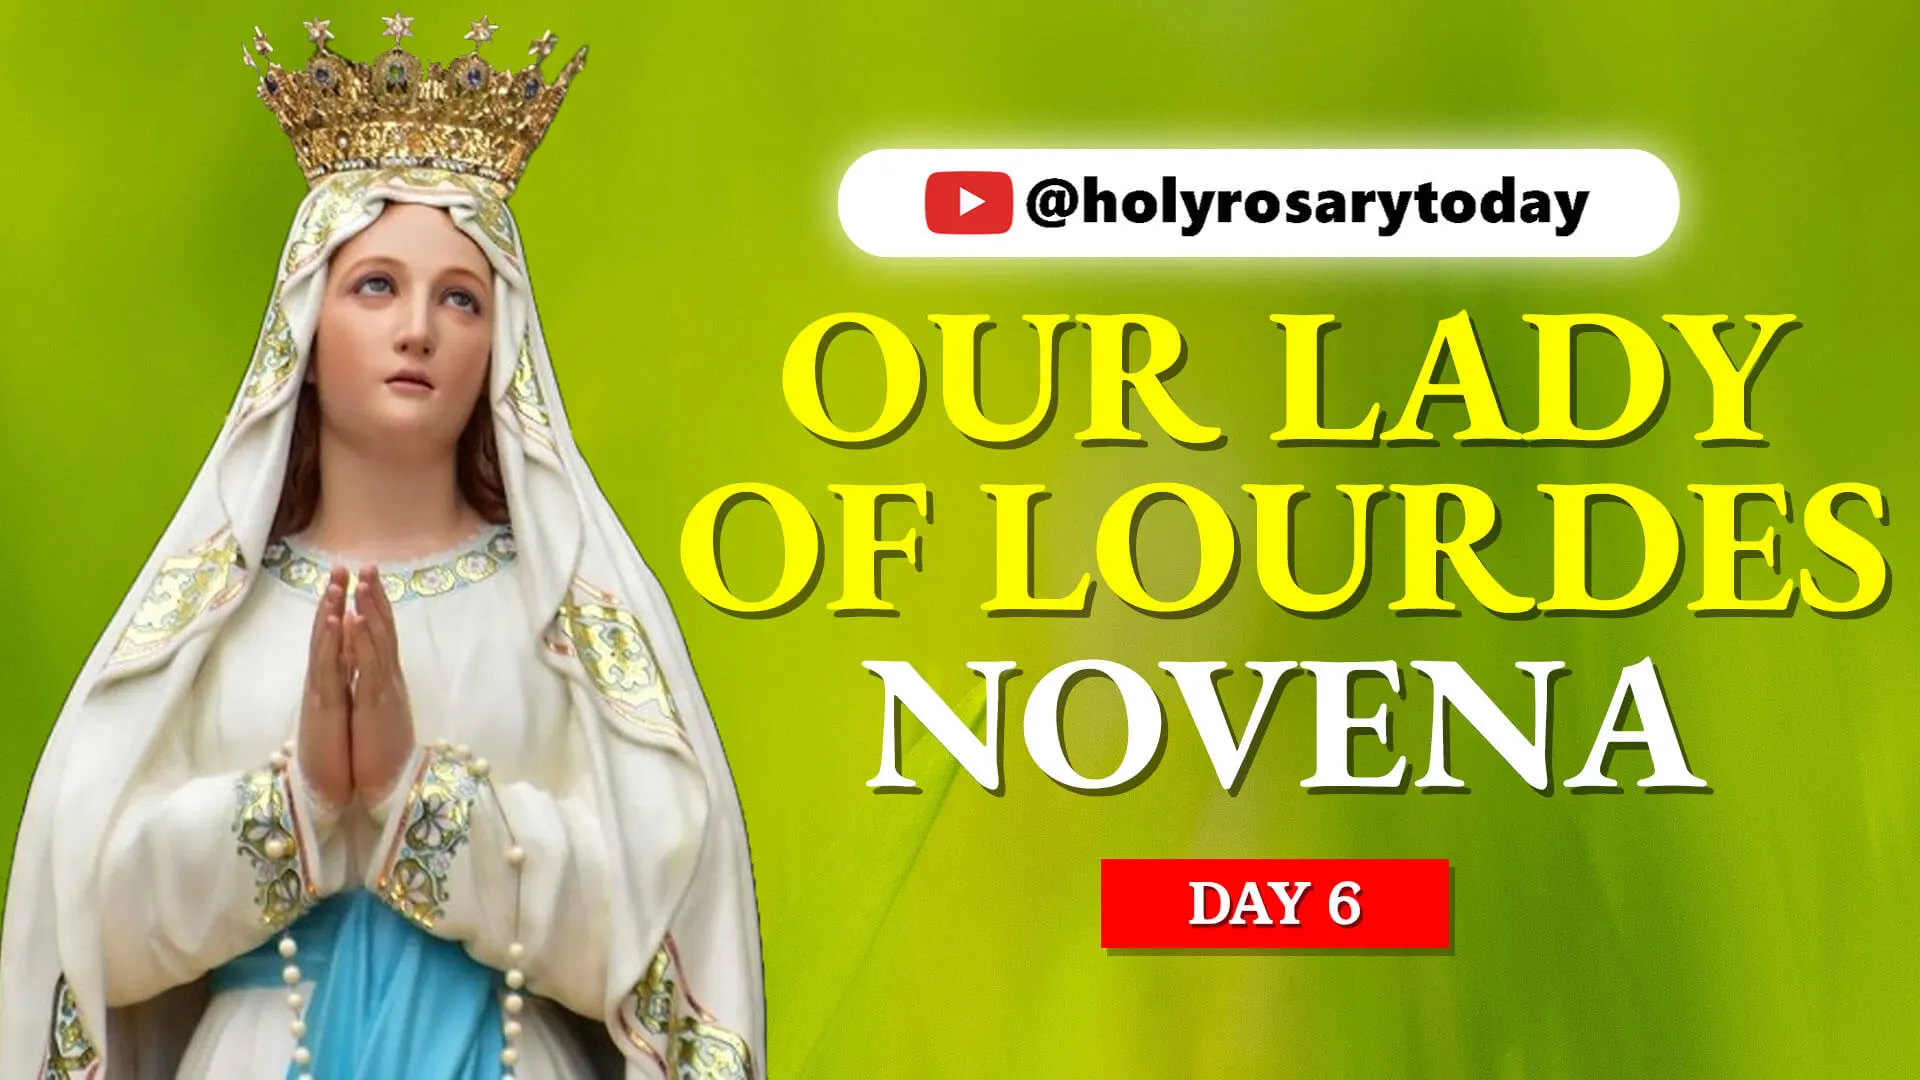 Our Lady of Lourdes Novena Day 6